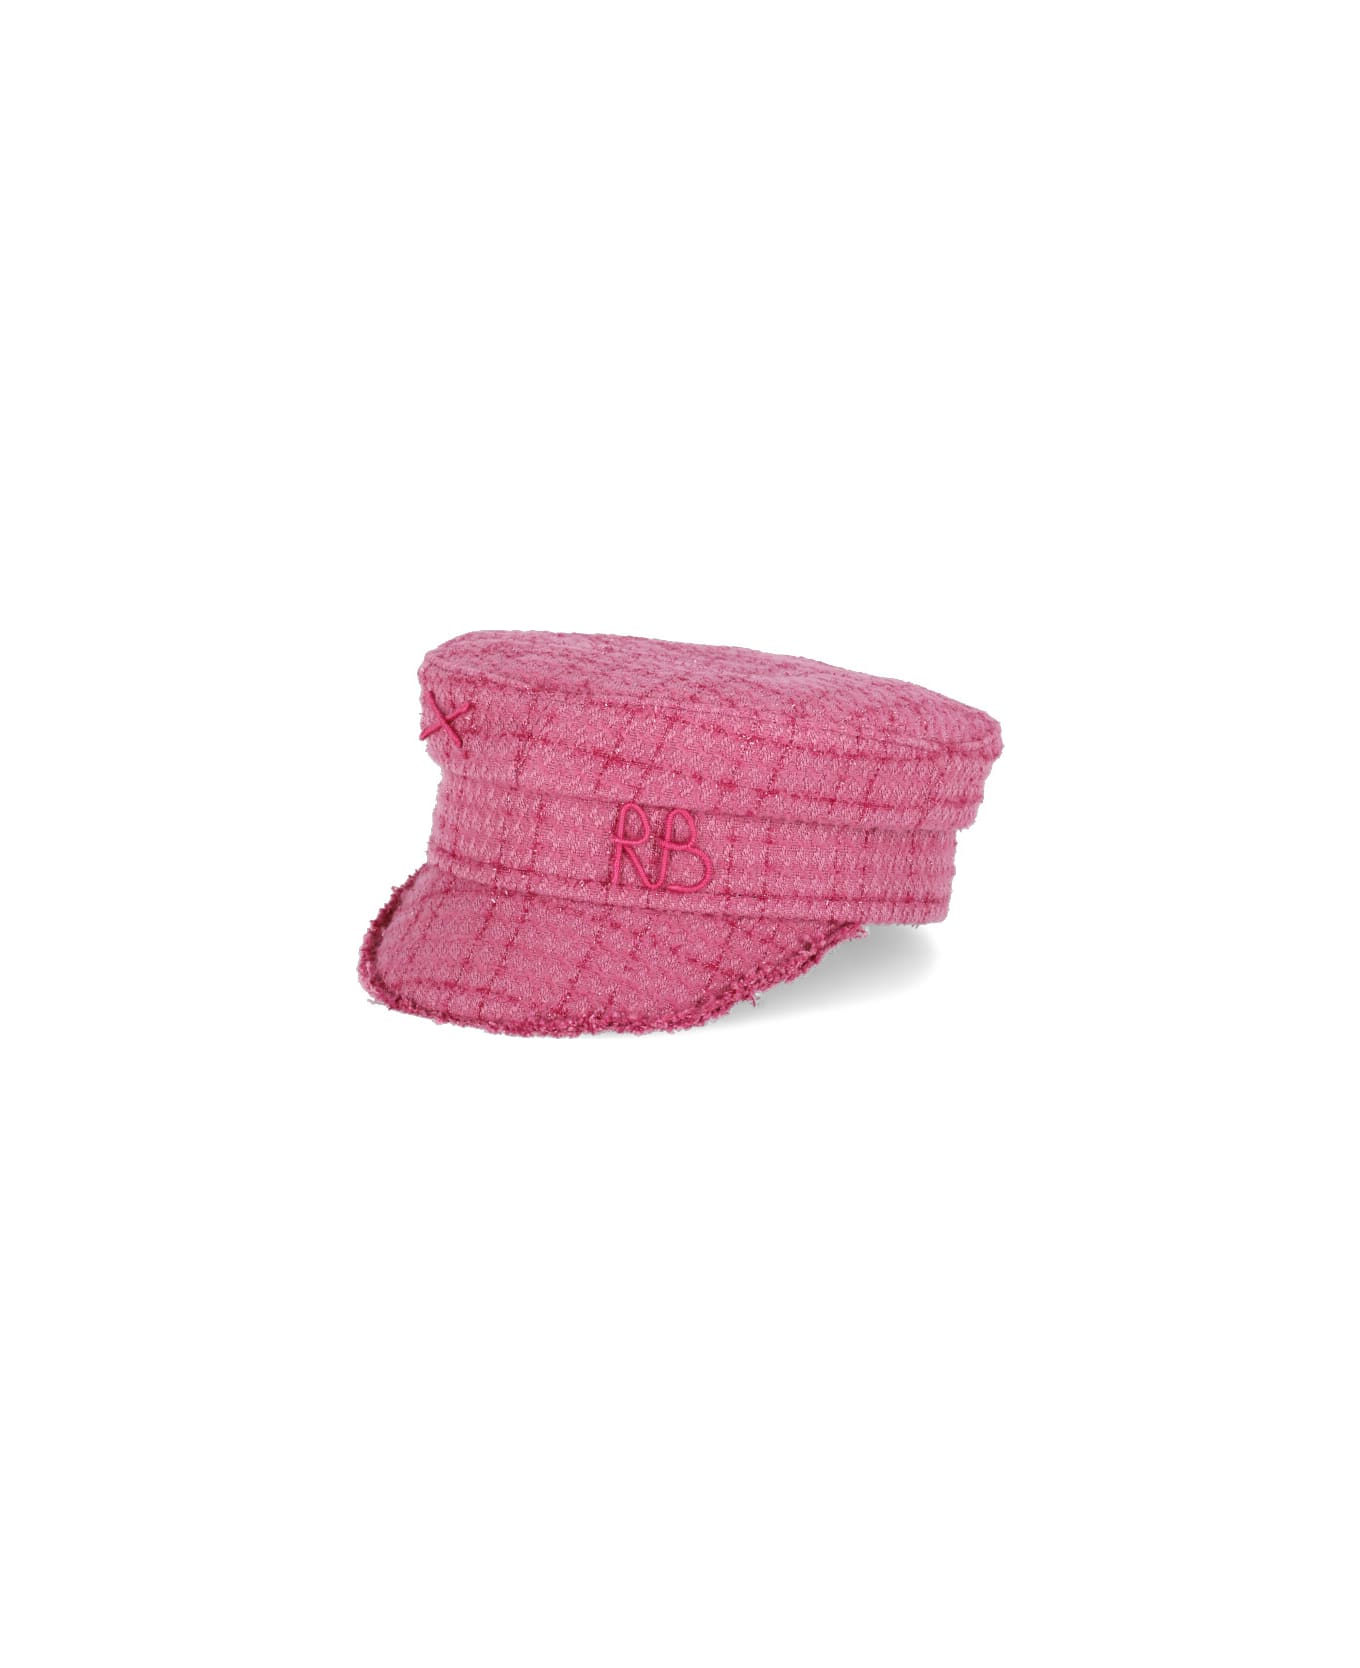 Ruslan Baginskiy Hat With Embroidery - Pink